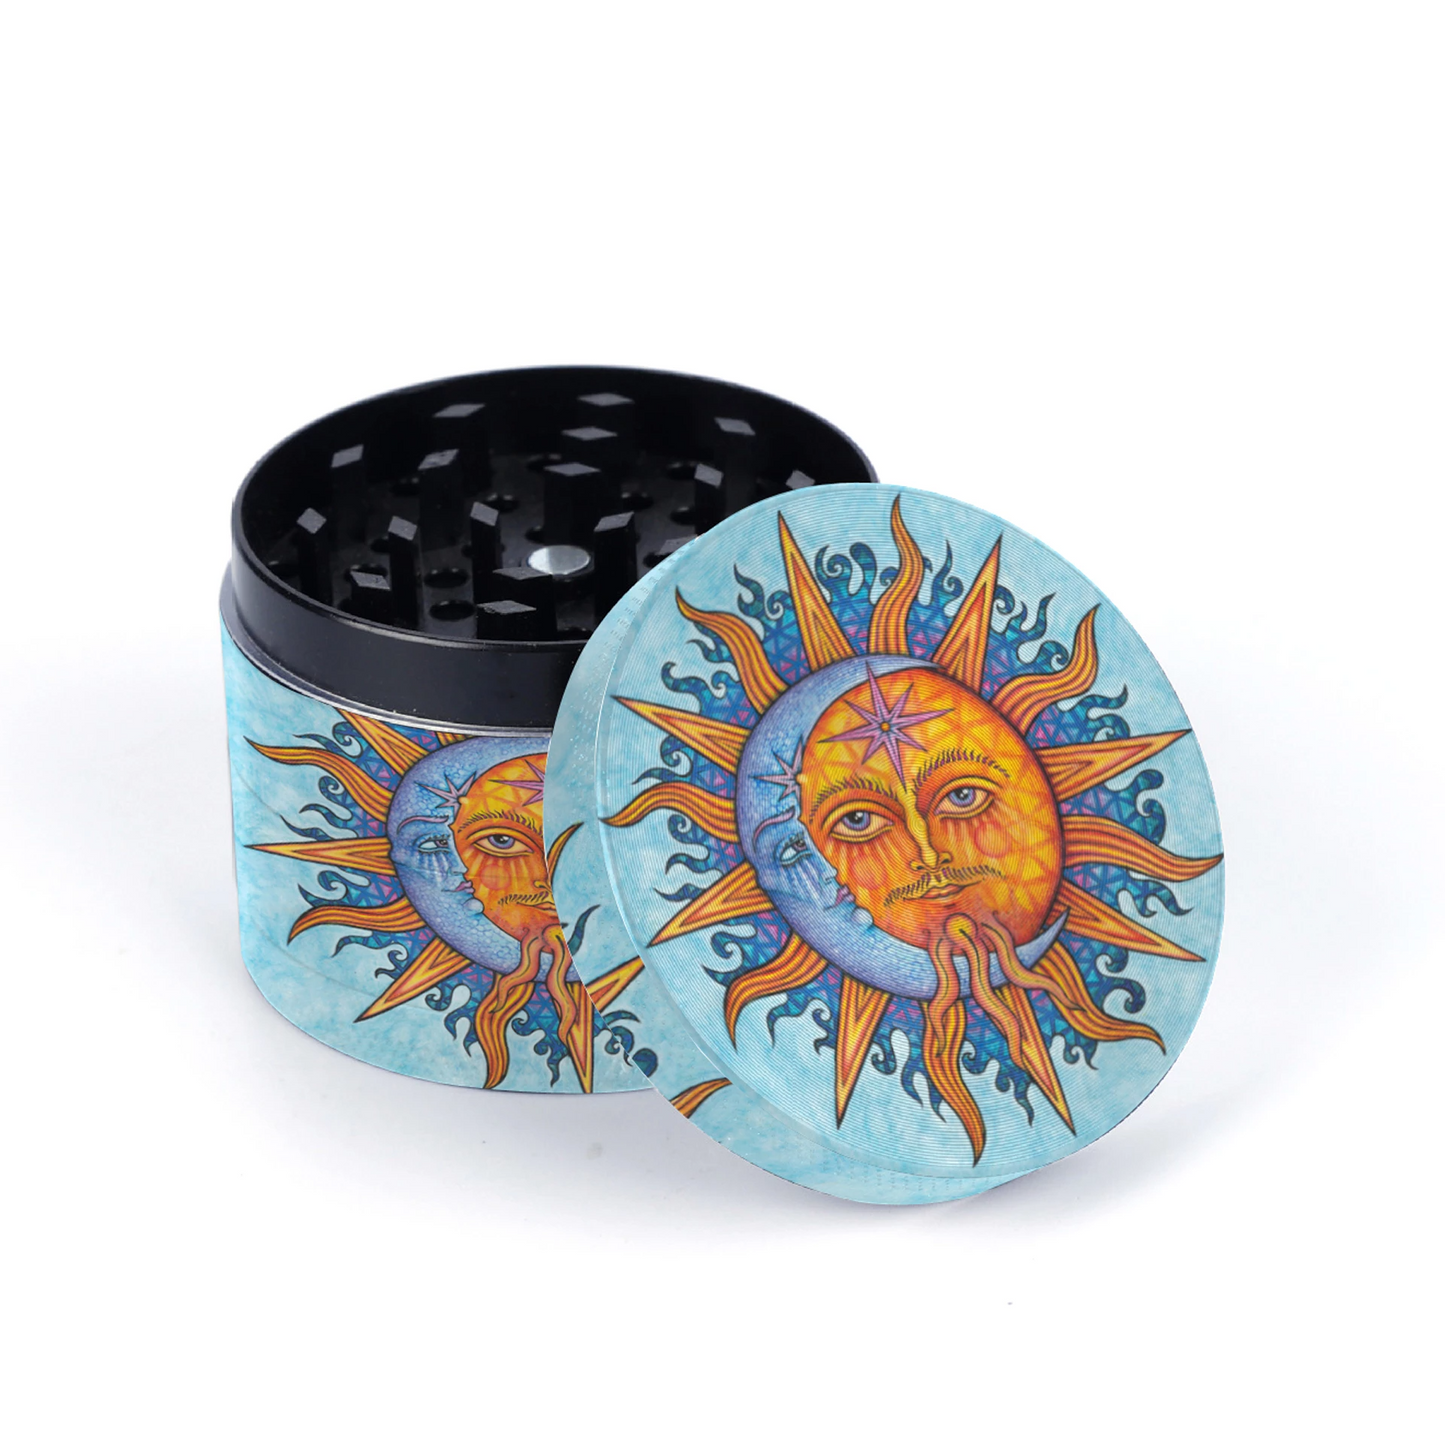 4 Layer Sun and Moon Grinder